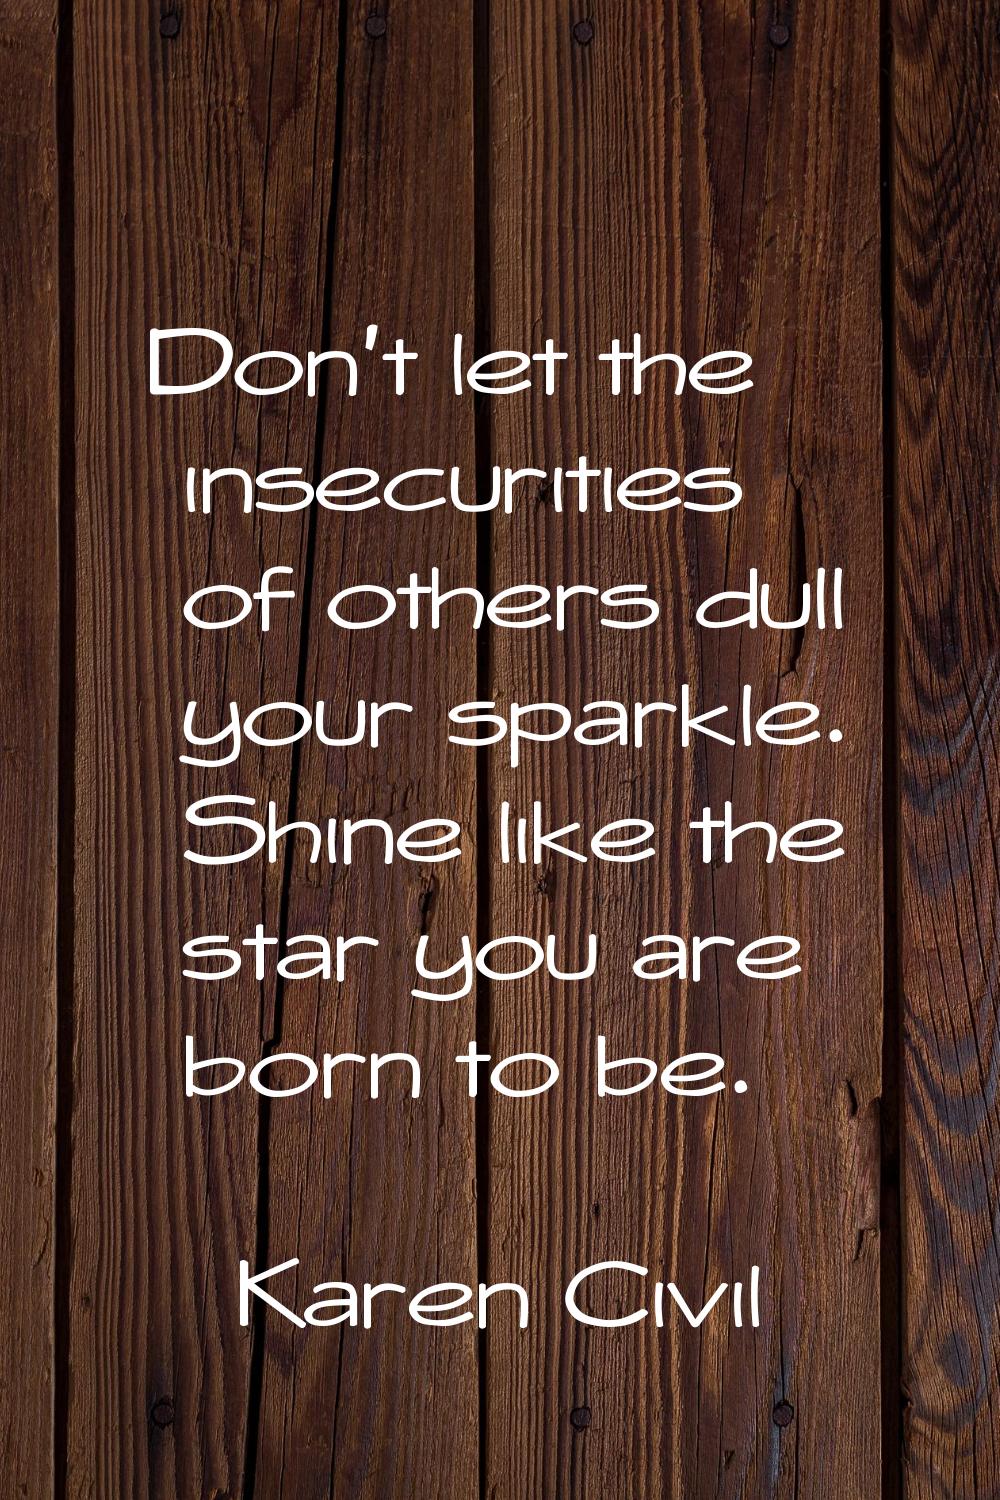 Don't let the insecurities of others dull your sparkle. Shine like the star you are born to be.